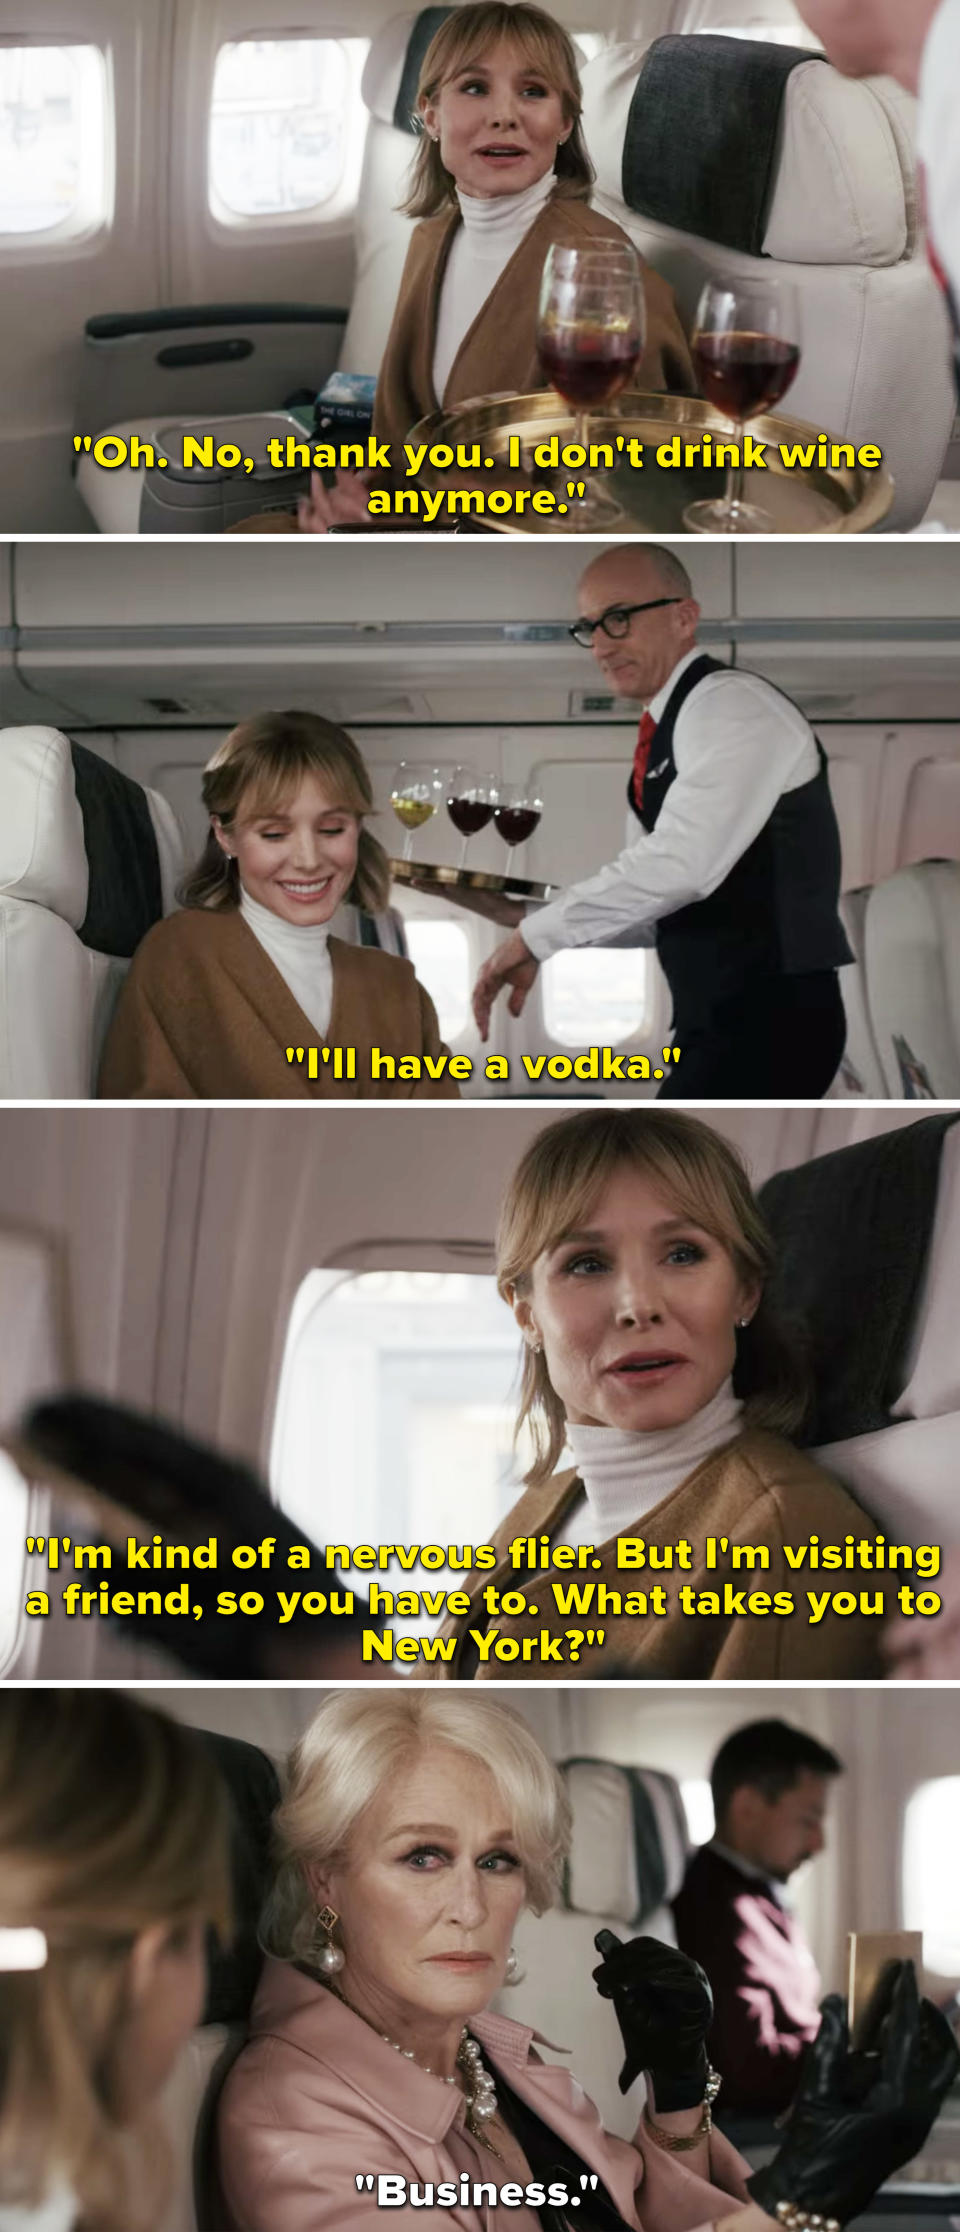 Anna, who is on a plane, saying she doesn't drink wine anymore, but will have vodka and then asking her seat neighbor, who is played by Glenn Close, why she's going to NYC